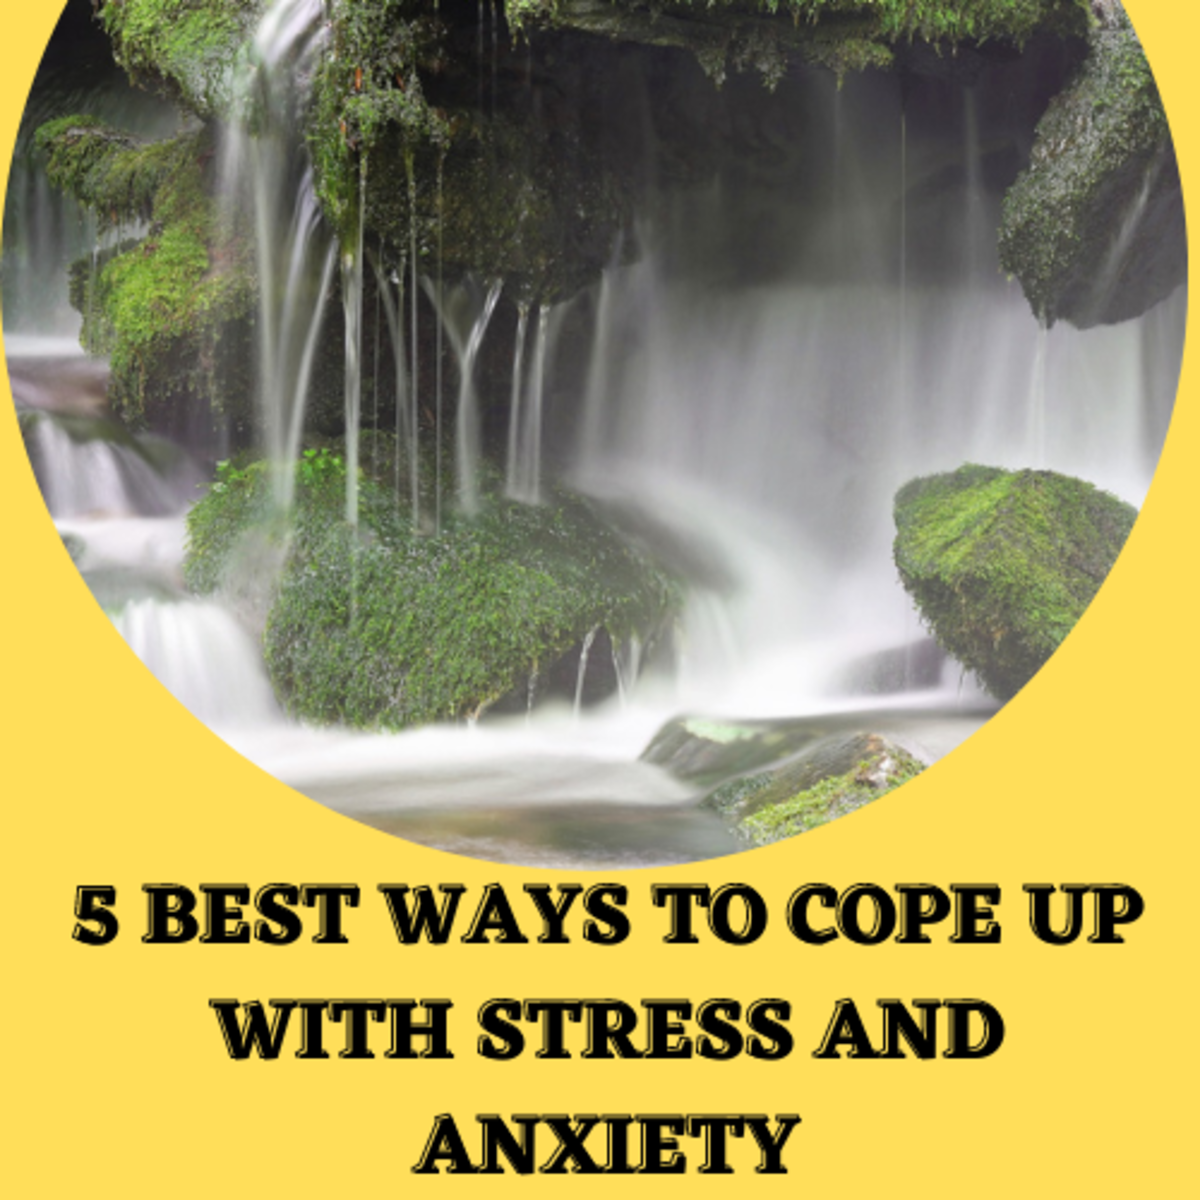 5 Best Ways to Cope up With Stress and Anxiety